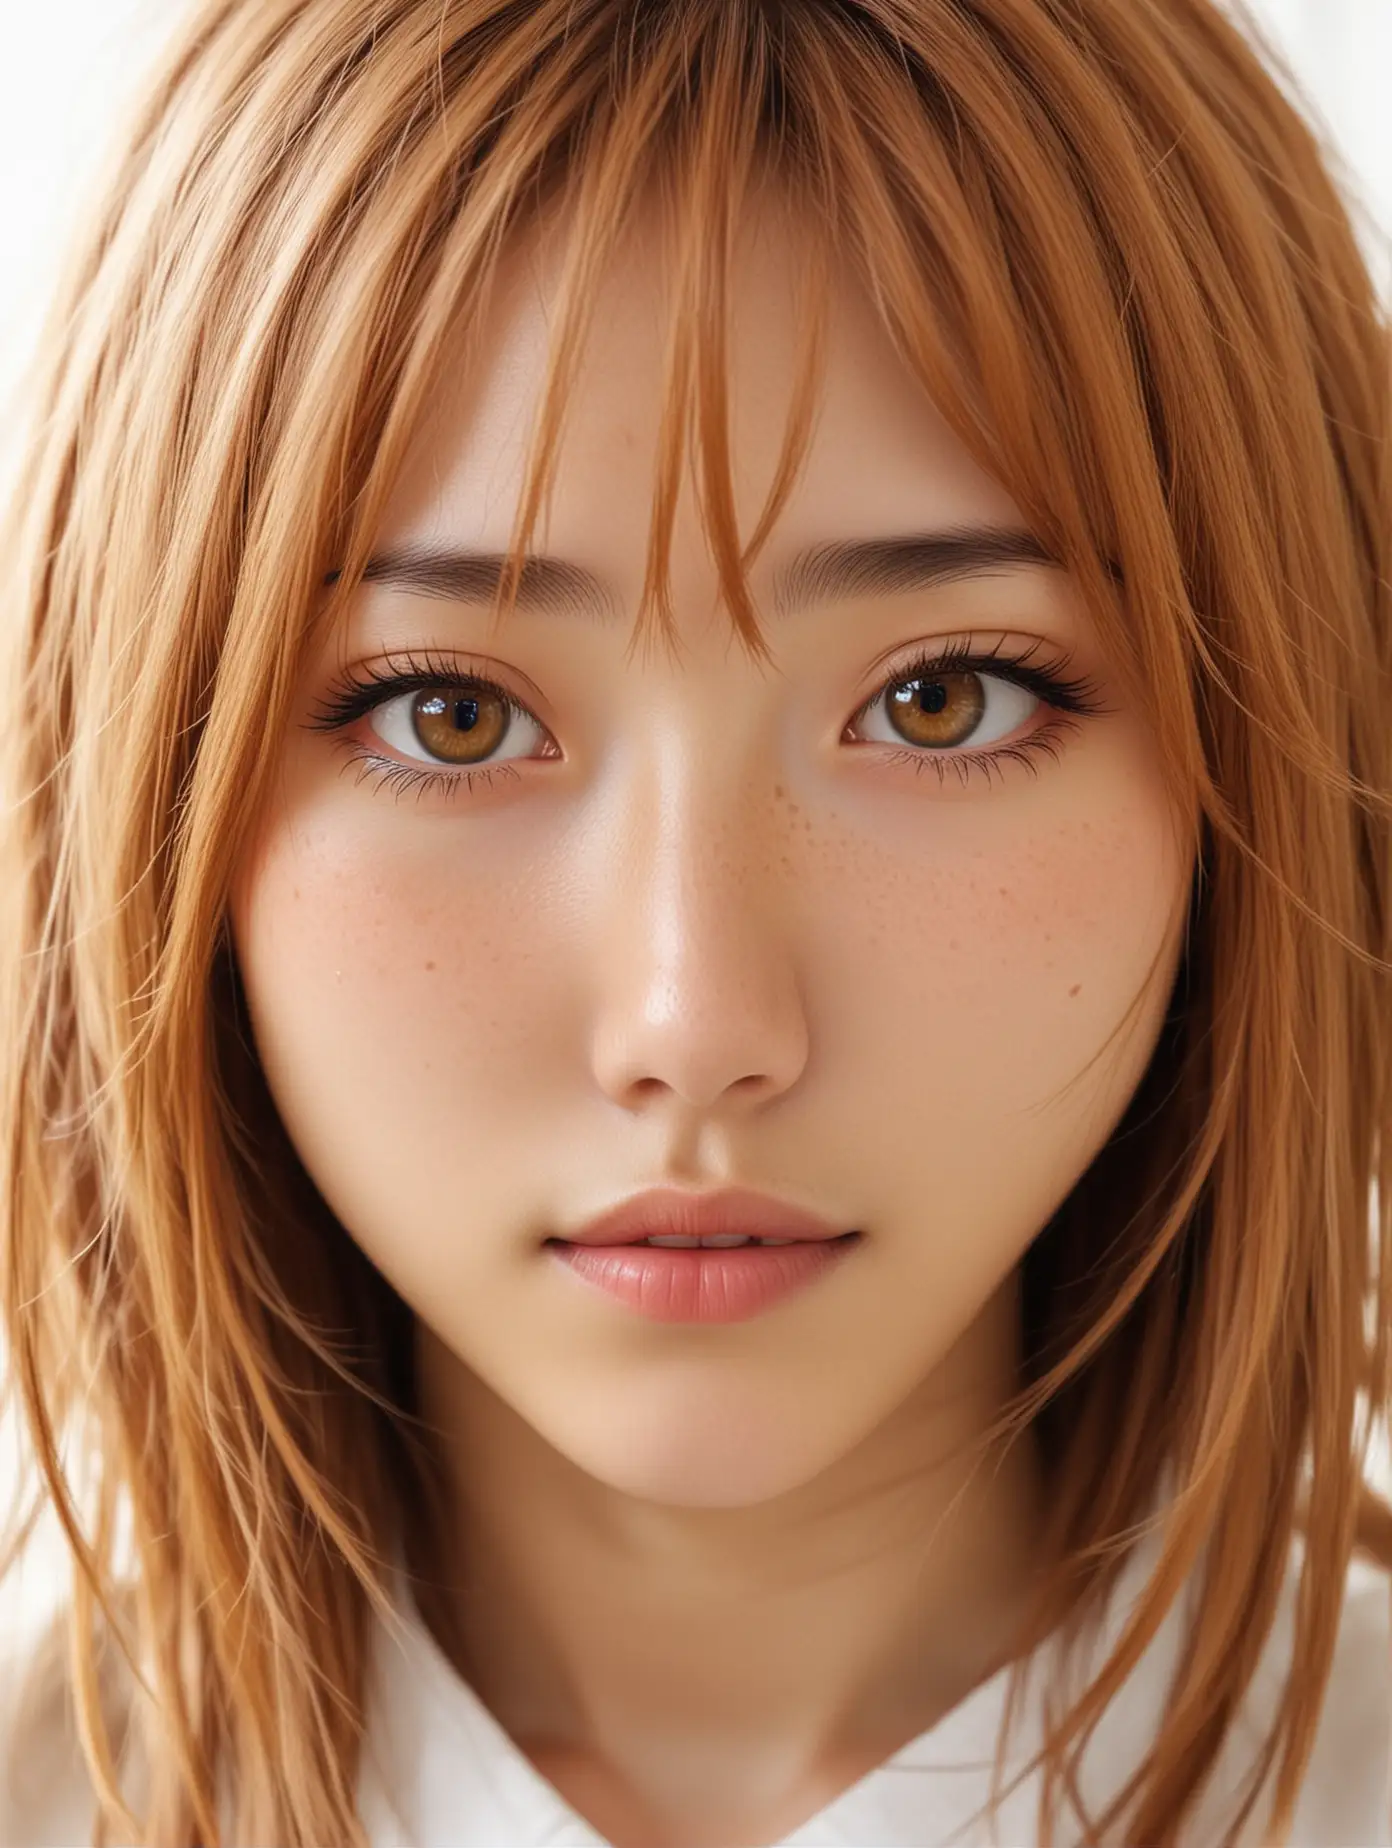 Japanese girl with very light skin and caramel-colored hair and medium length hair. She has freckles covering her nose and huge amber eyes. Fullbody.